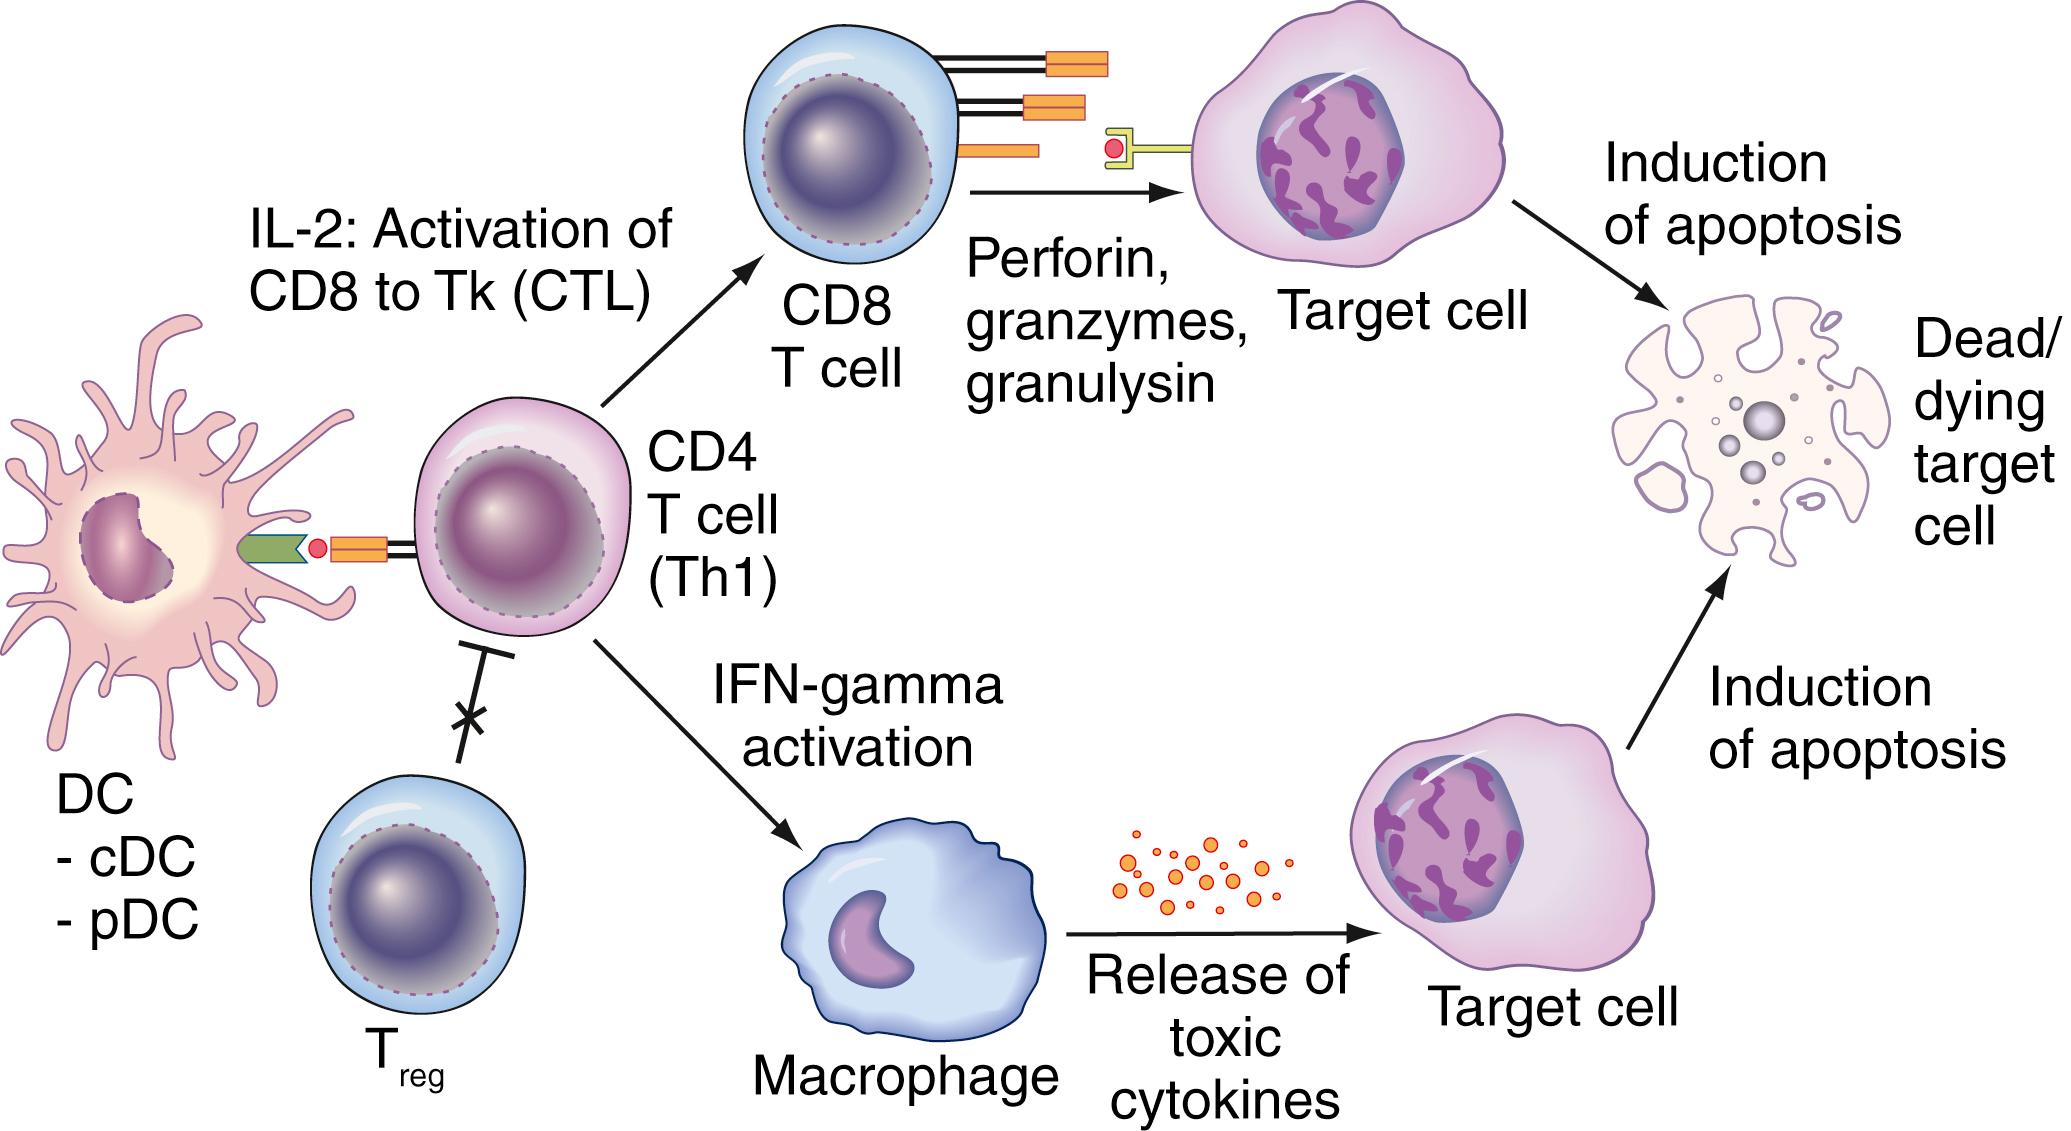 Fig. 55.1, The process of target destruction begins with dendritic cells (DC) that present peptides from beta cell autoantigens to CD4 Th1 cells. DCs can be classic (conventional) DCs (cDCs) or plasmacytoid DCs (pDCs). Failure to regulate Th1 cells via defective regulatory T-cell (T reg ) function could contribute to Th1 cell autoimmunity. Activated autoreactive Th1 cells, in turn, activate CD8 T cells via interleukin-2 and DC upregulation. Activated CD8 T cells are functionally T killer cells ( Tk ; aka, cytotoxic T lymphocytes [CTL] ). Via cell-cell contact between Th1 cells and macrophages (via CD40L–CD40 interactions [not shown] ) and interferon-gamma (IFN-gamma) secreted by Th1 cells, macrophages are activated. Via both CD8 Tk cells and macrophages, target cells are triggered to undergo apoptosis. In the case of type 1 diabetes, beta cells die.